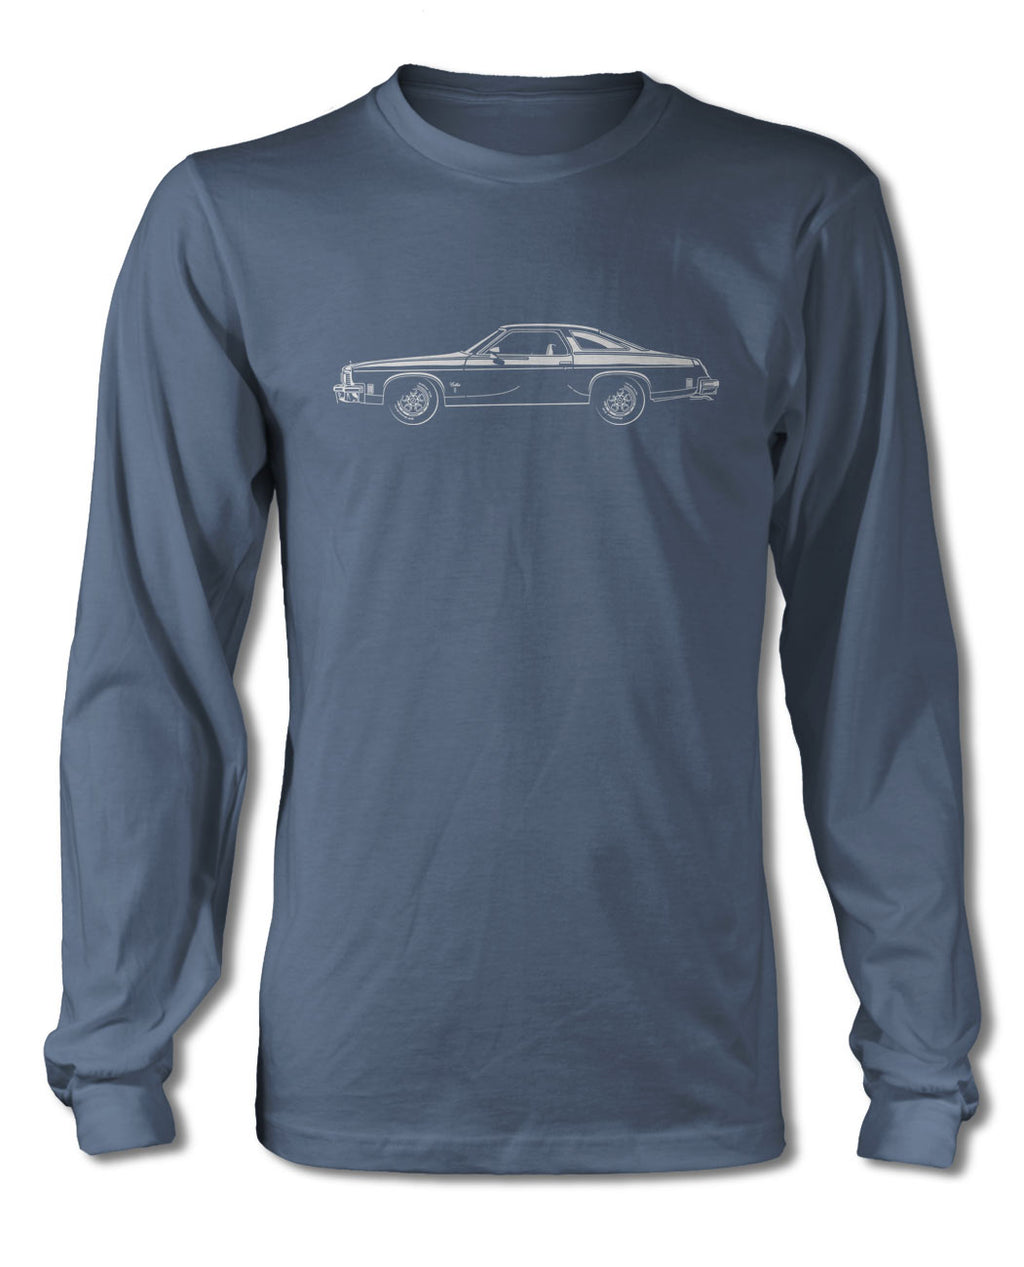 1974 Oldsmobile Cutlass S Coupe T-Shirt - Long Sleeves - Side View